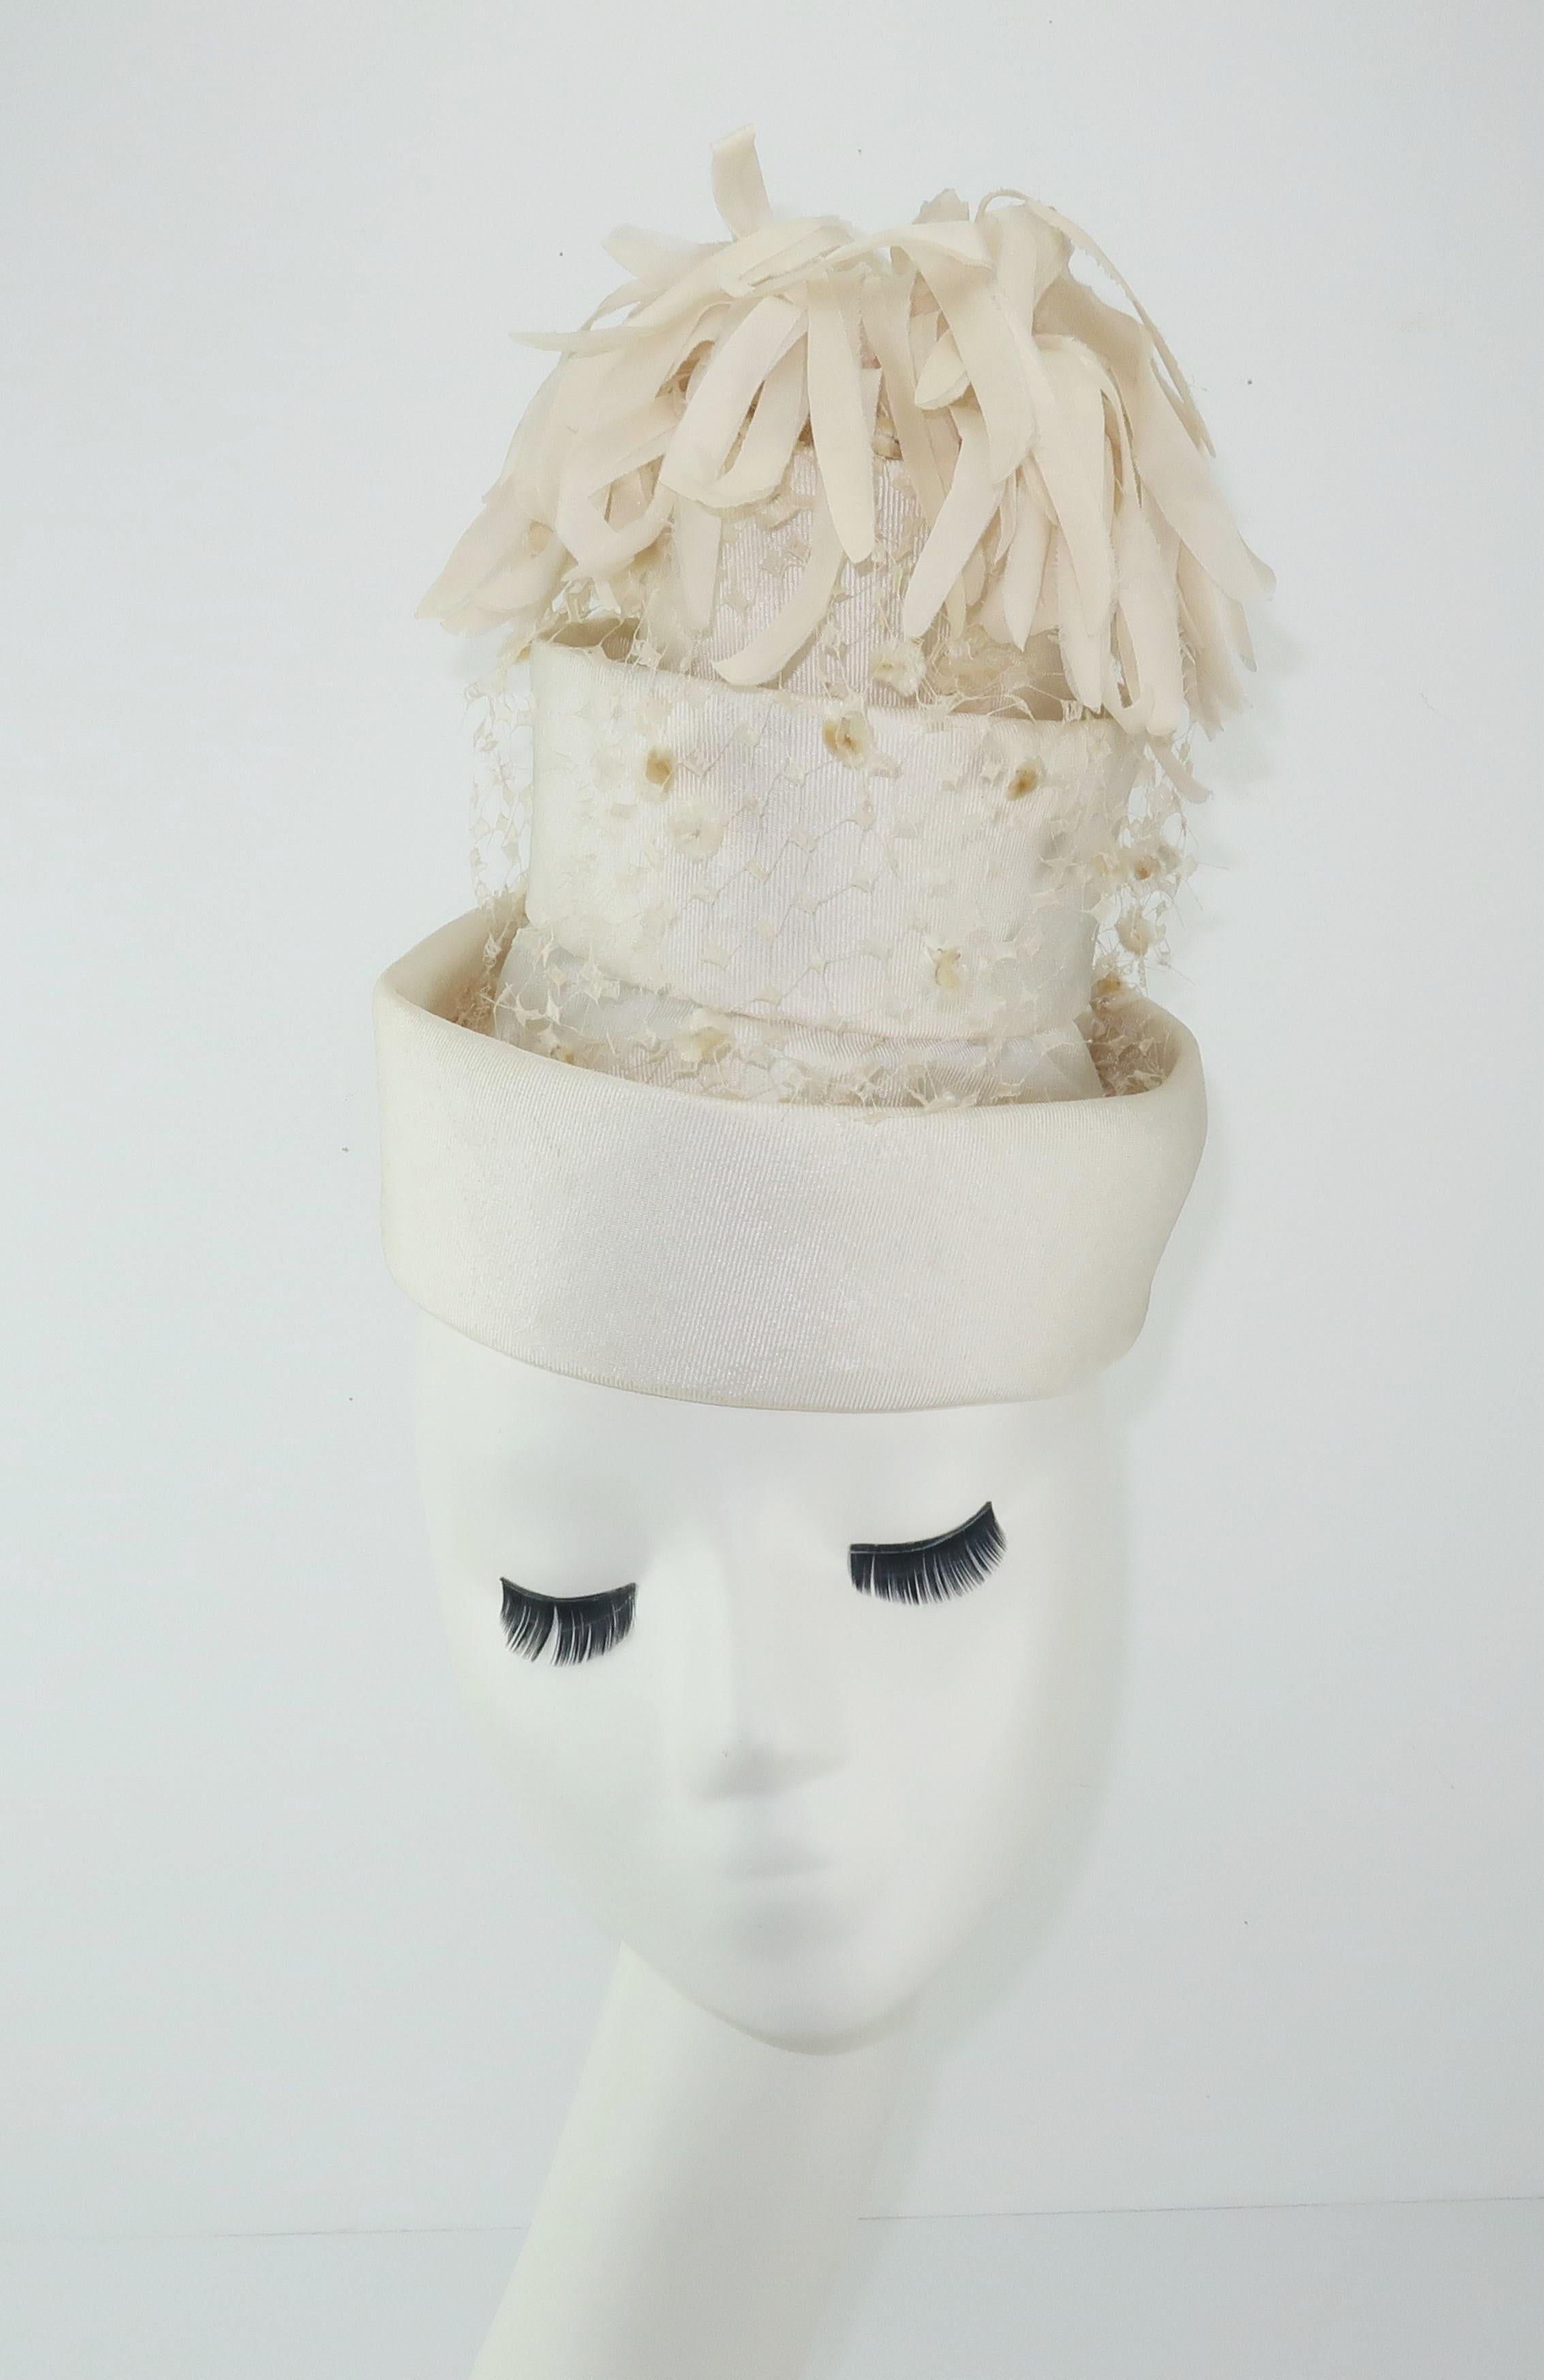 Turn heads and wow a crowd with this C.1960 Archie Eason candlelight white faille fabric hat constructed with layers resembling a wedding cake.  Originally from Georgia, Mr. Eason started his career as a milliner in the 1950’s creating unusual and